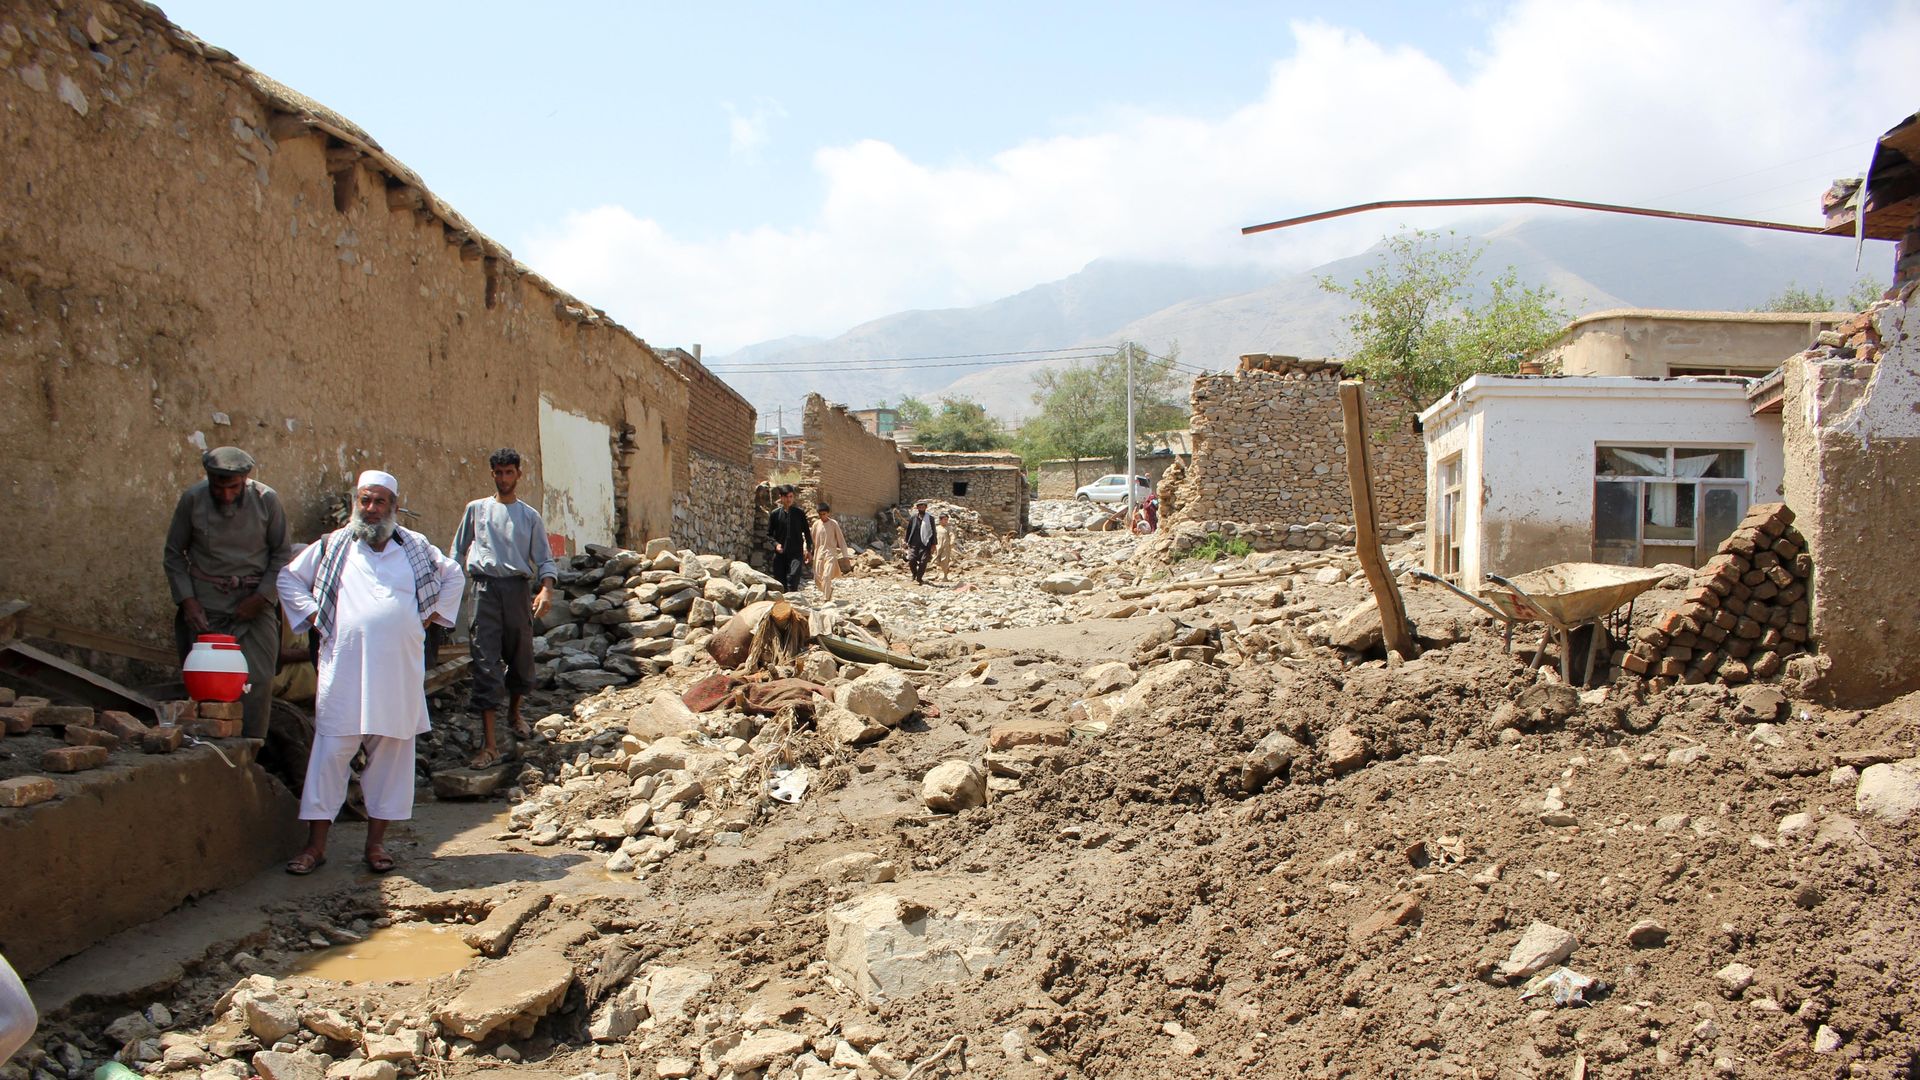 Damaged houses in Parwan Province on August 27.